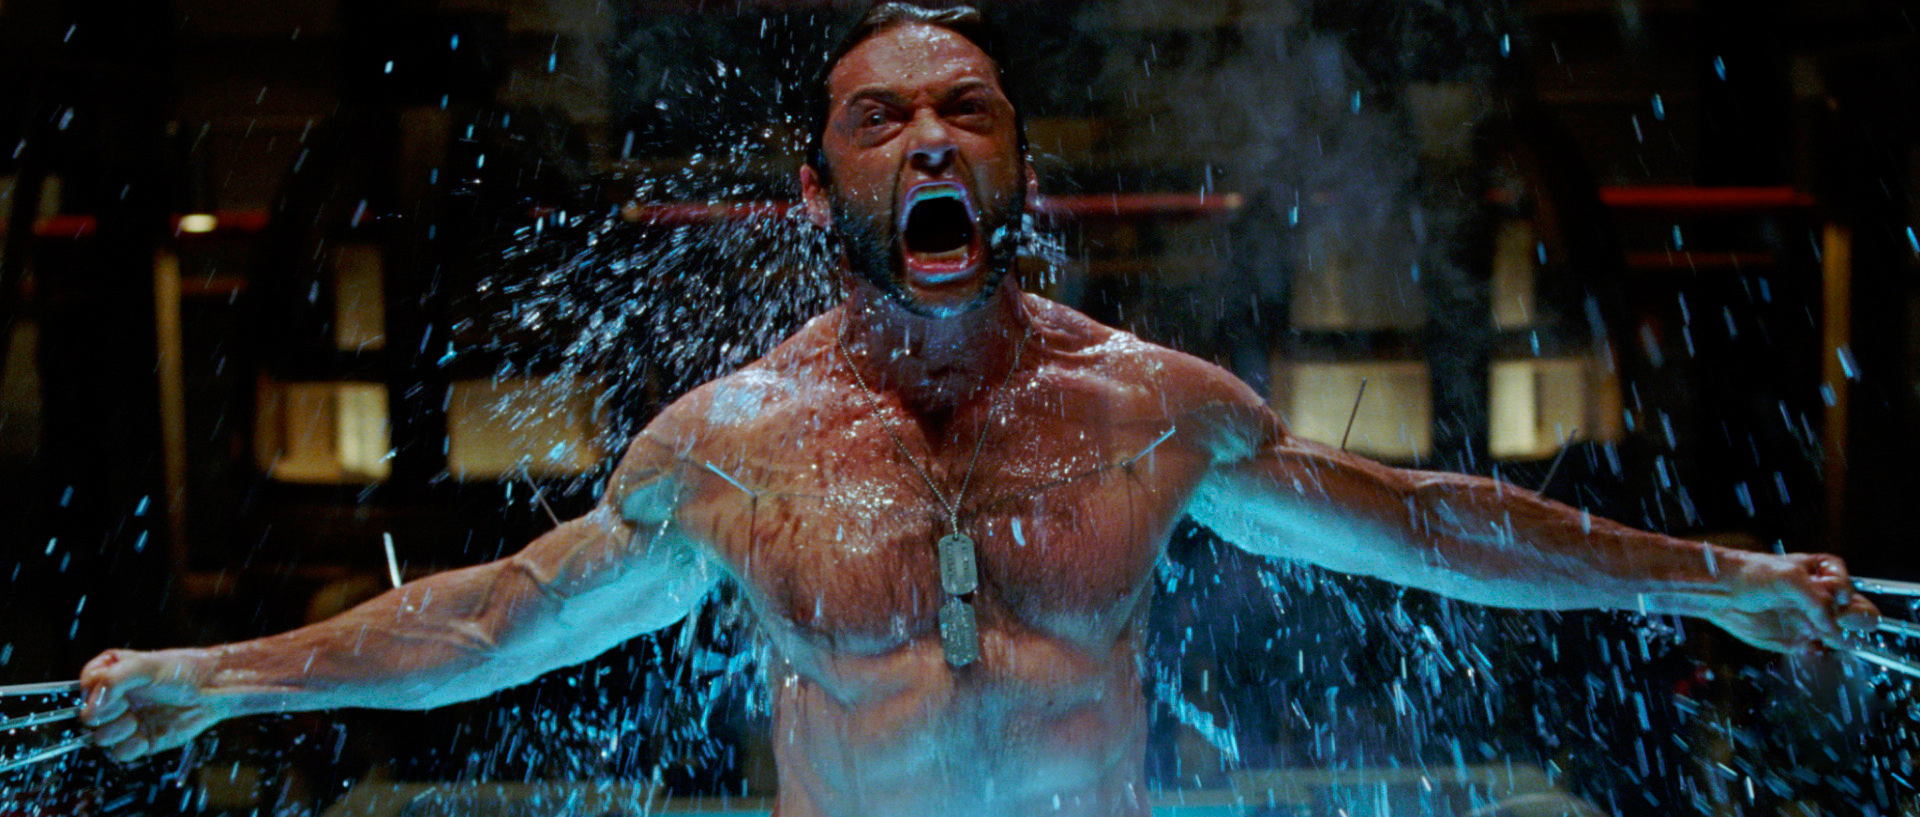 10 Best Actors Who Could Replace Hugh Jackman As Wolverine